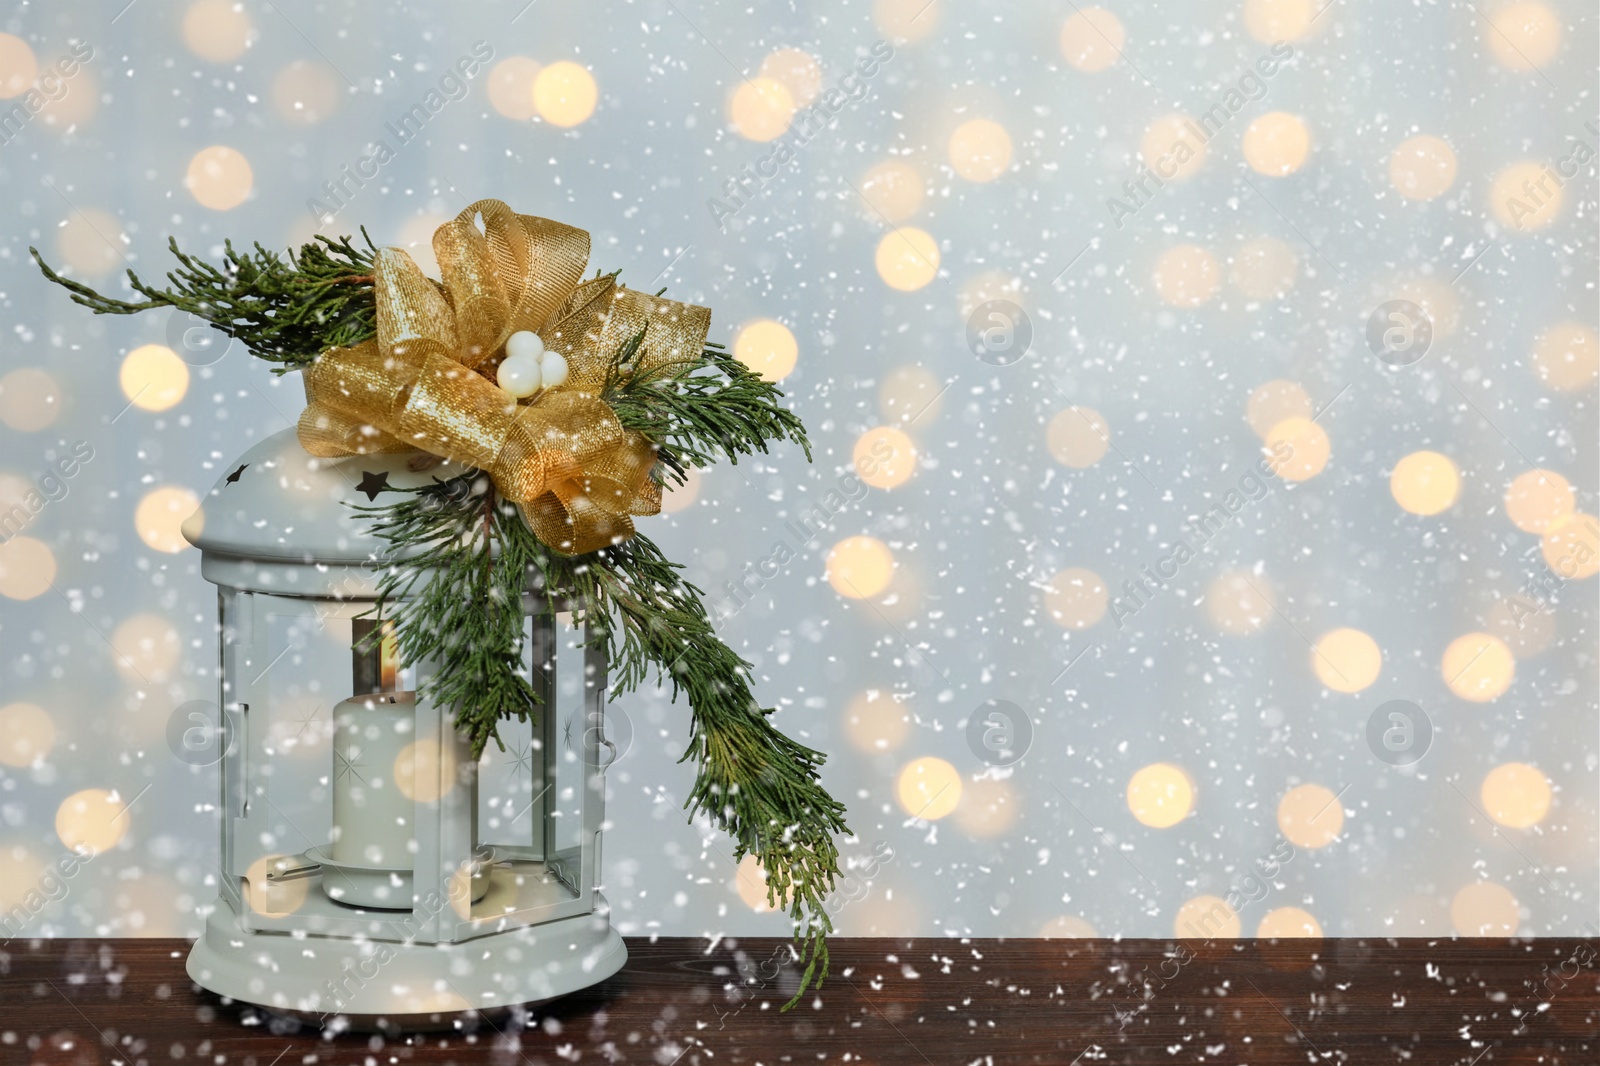 Image of Christmas lantern on wooden table, space for text. Bokeh effect